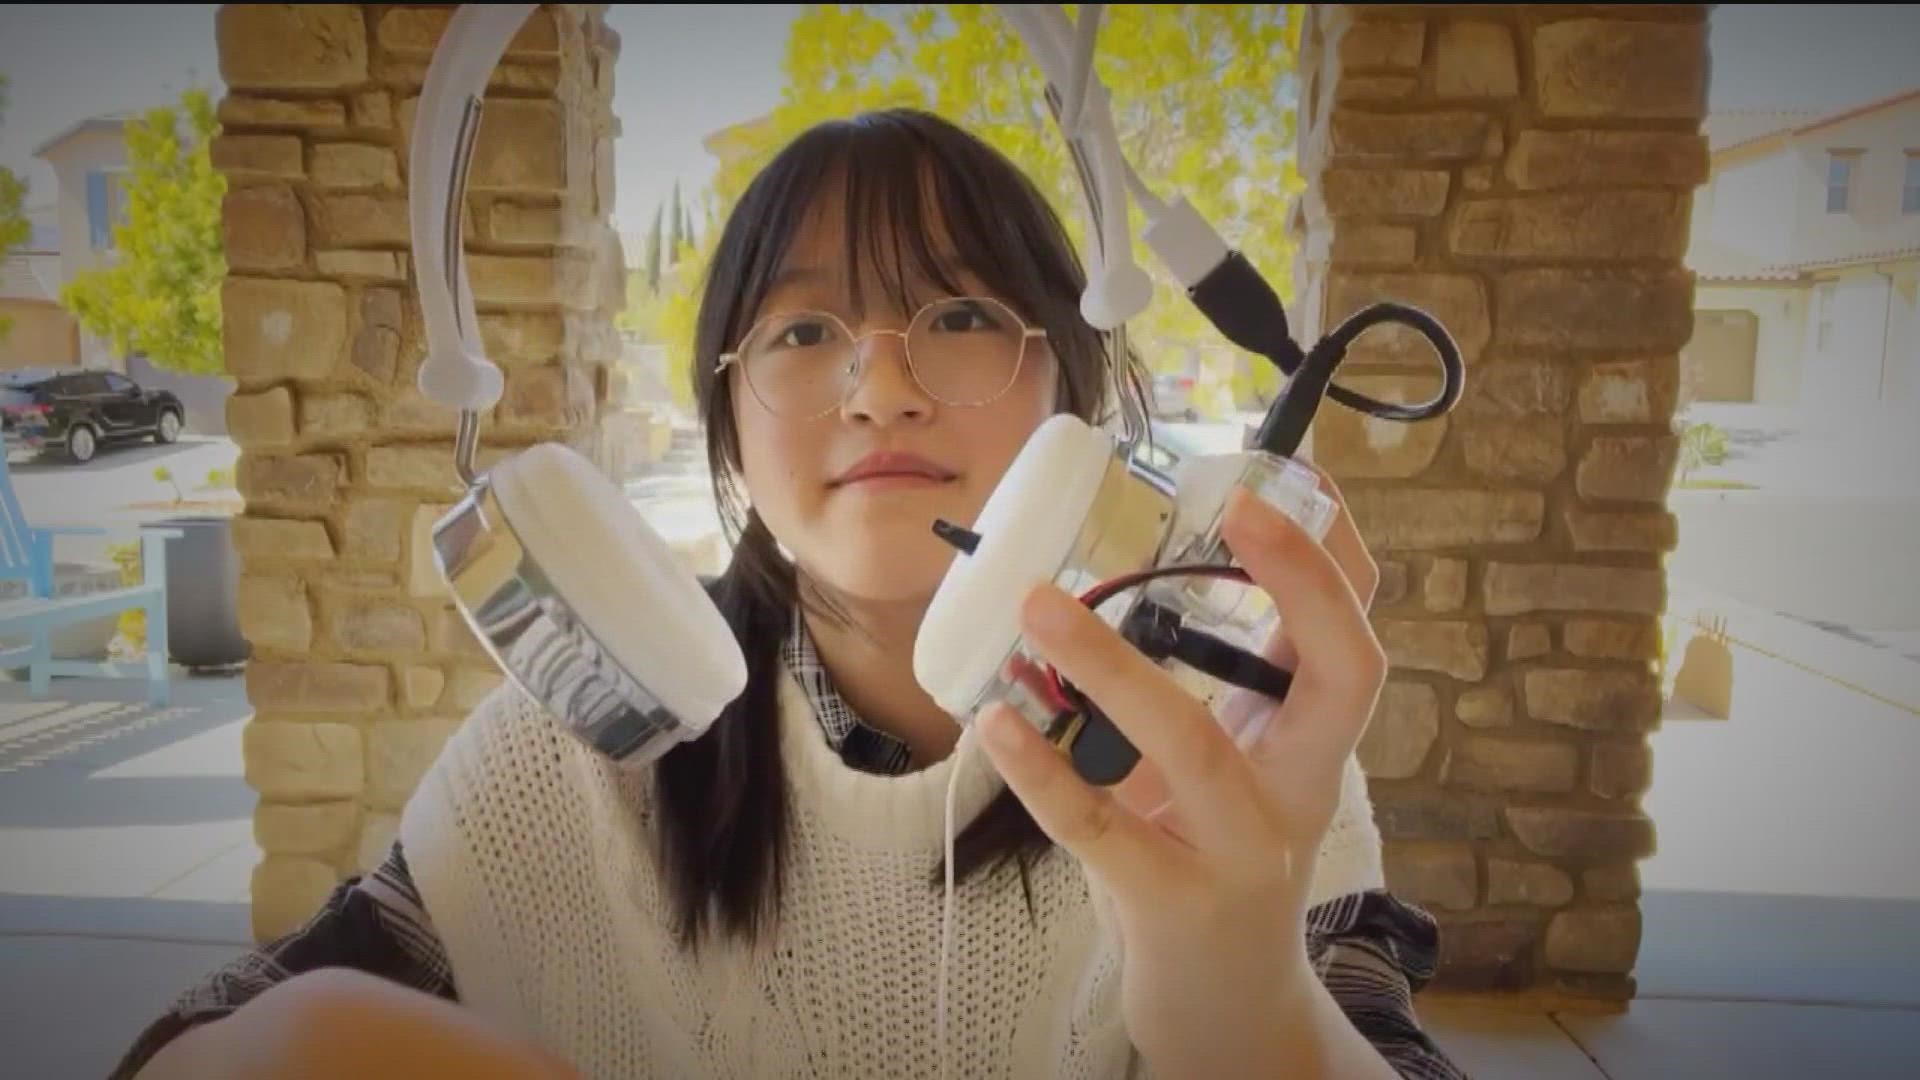 14-year-old Leanne Fan invented headphones that detect and treat mid-ear infections.